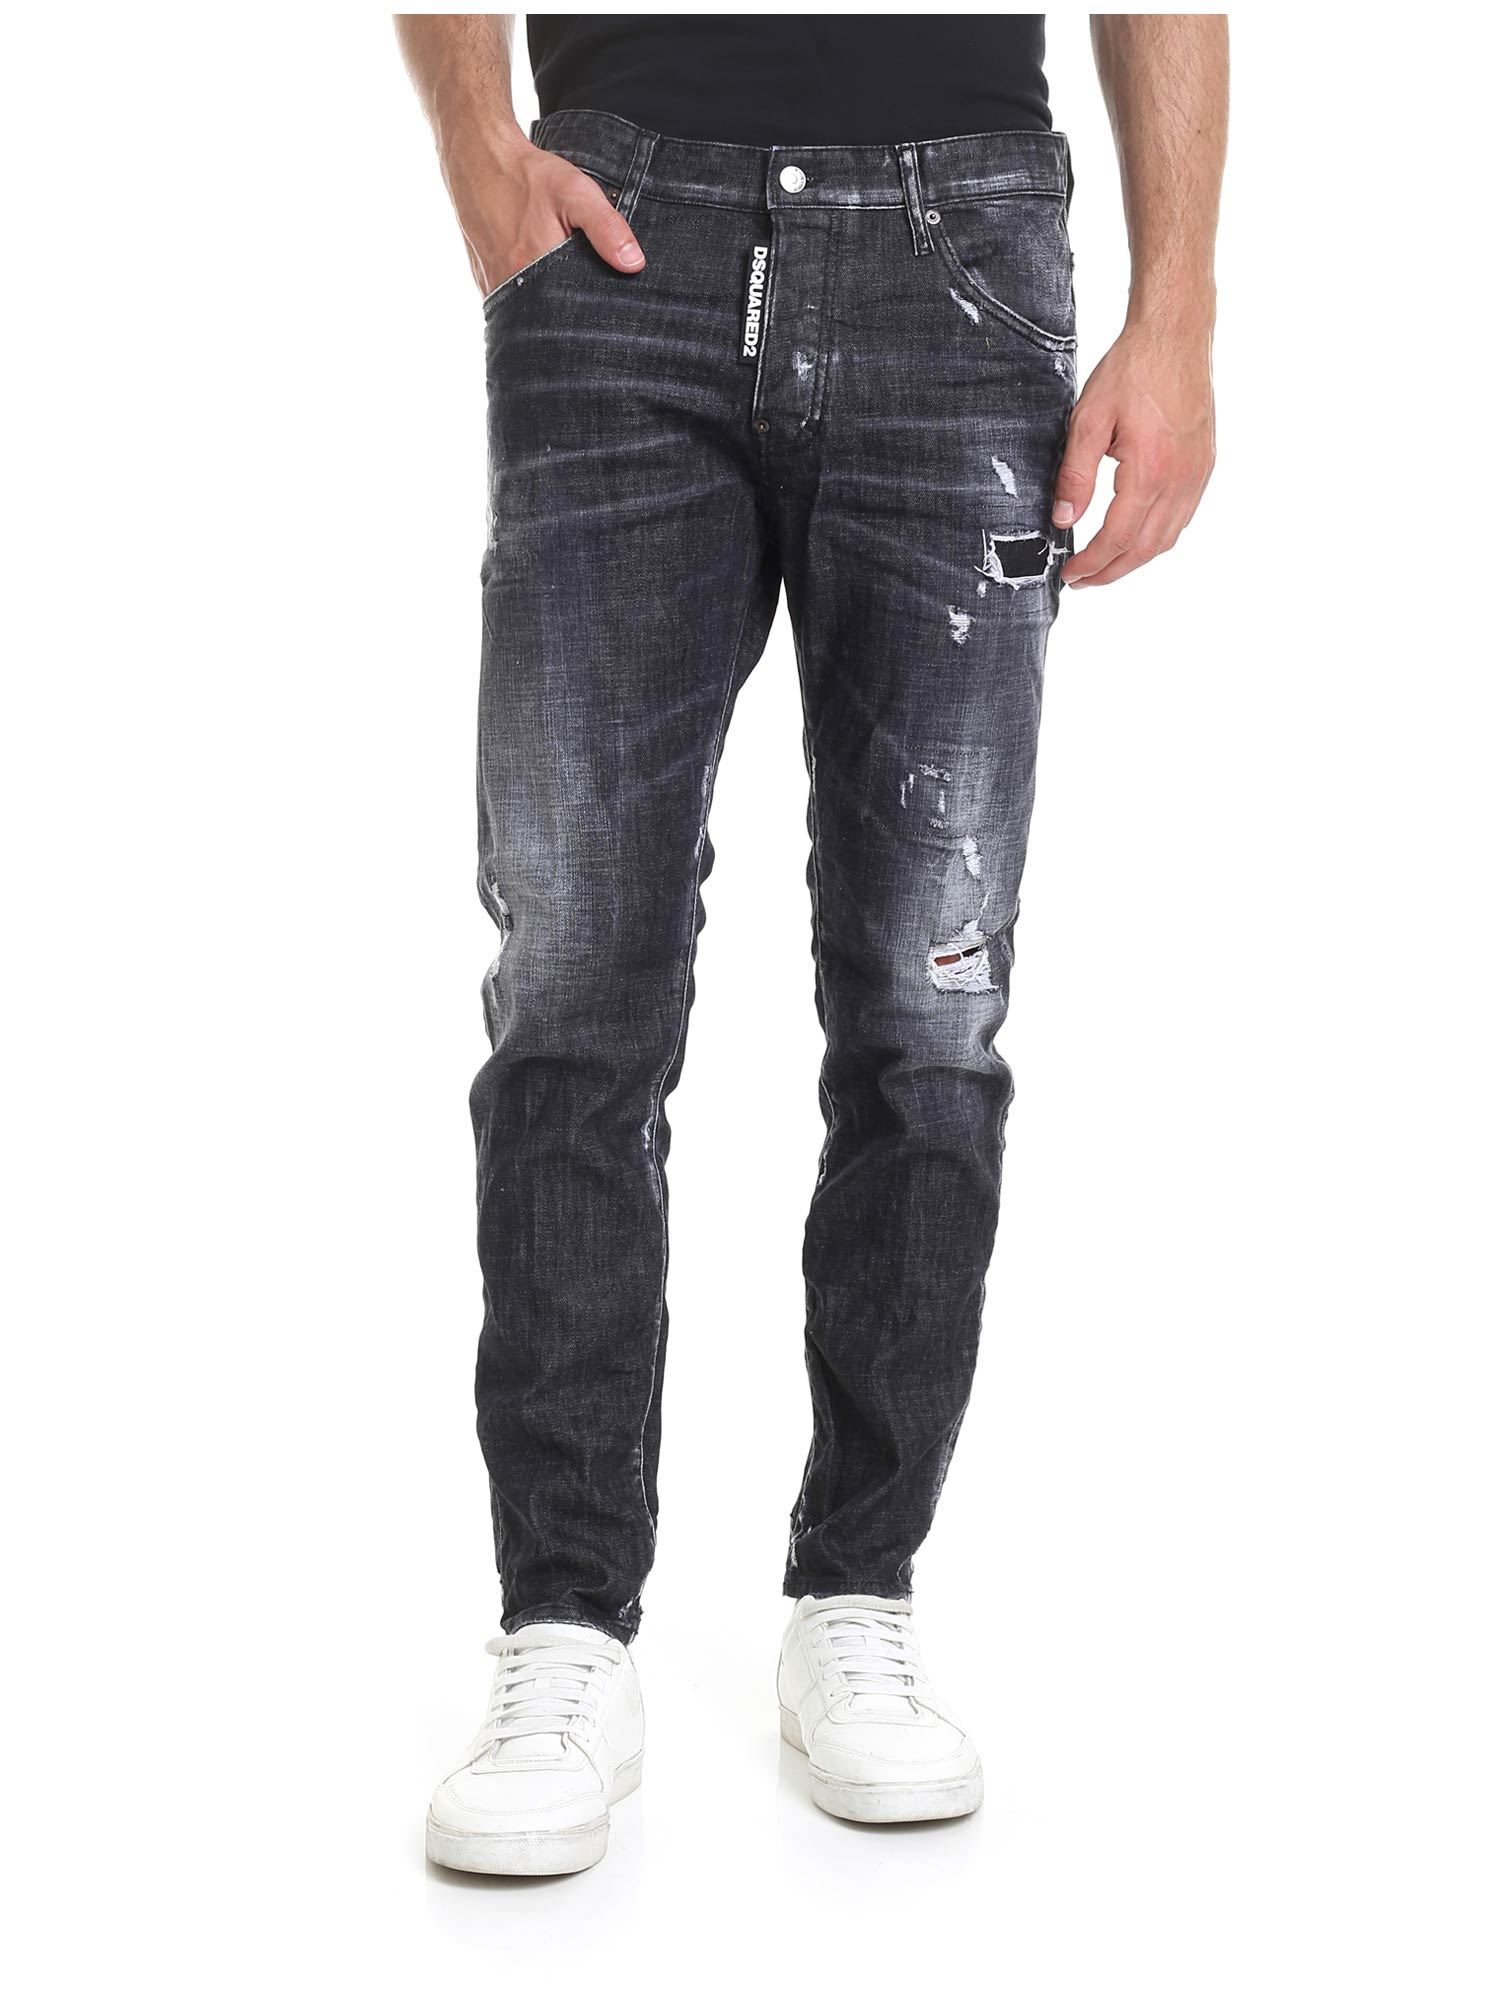 jeans dsquared2 destroyed